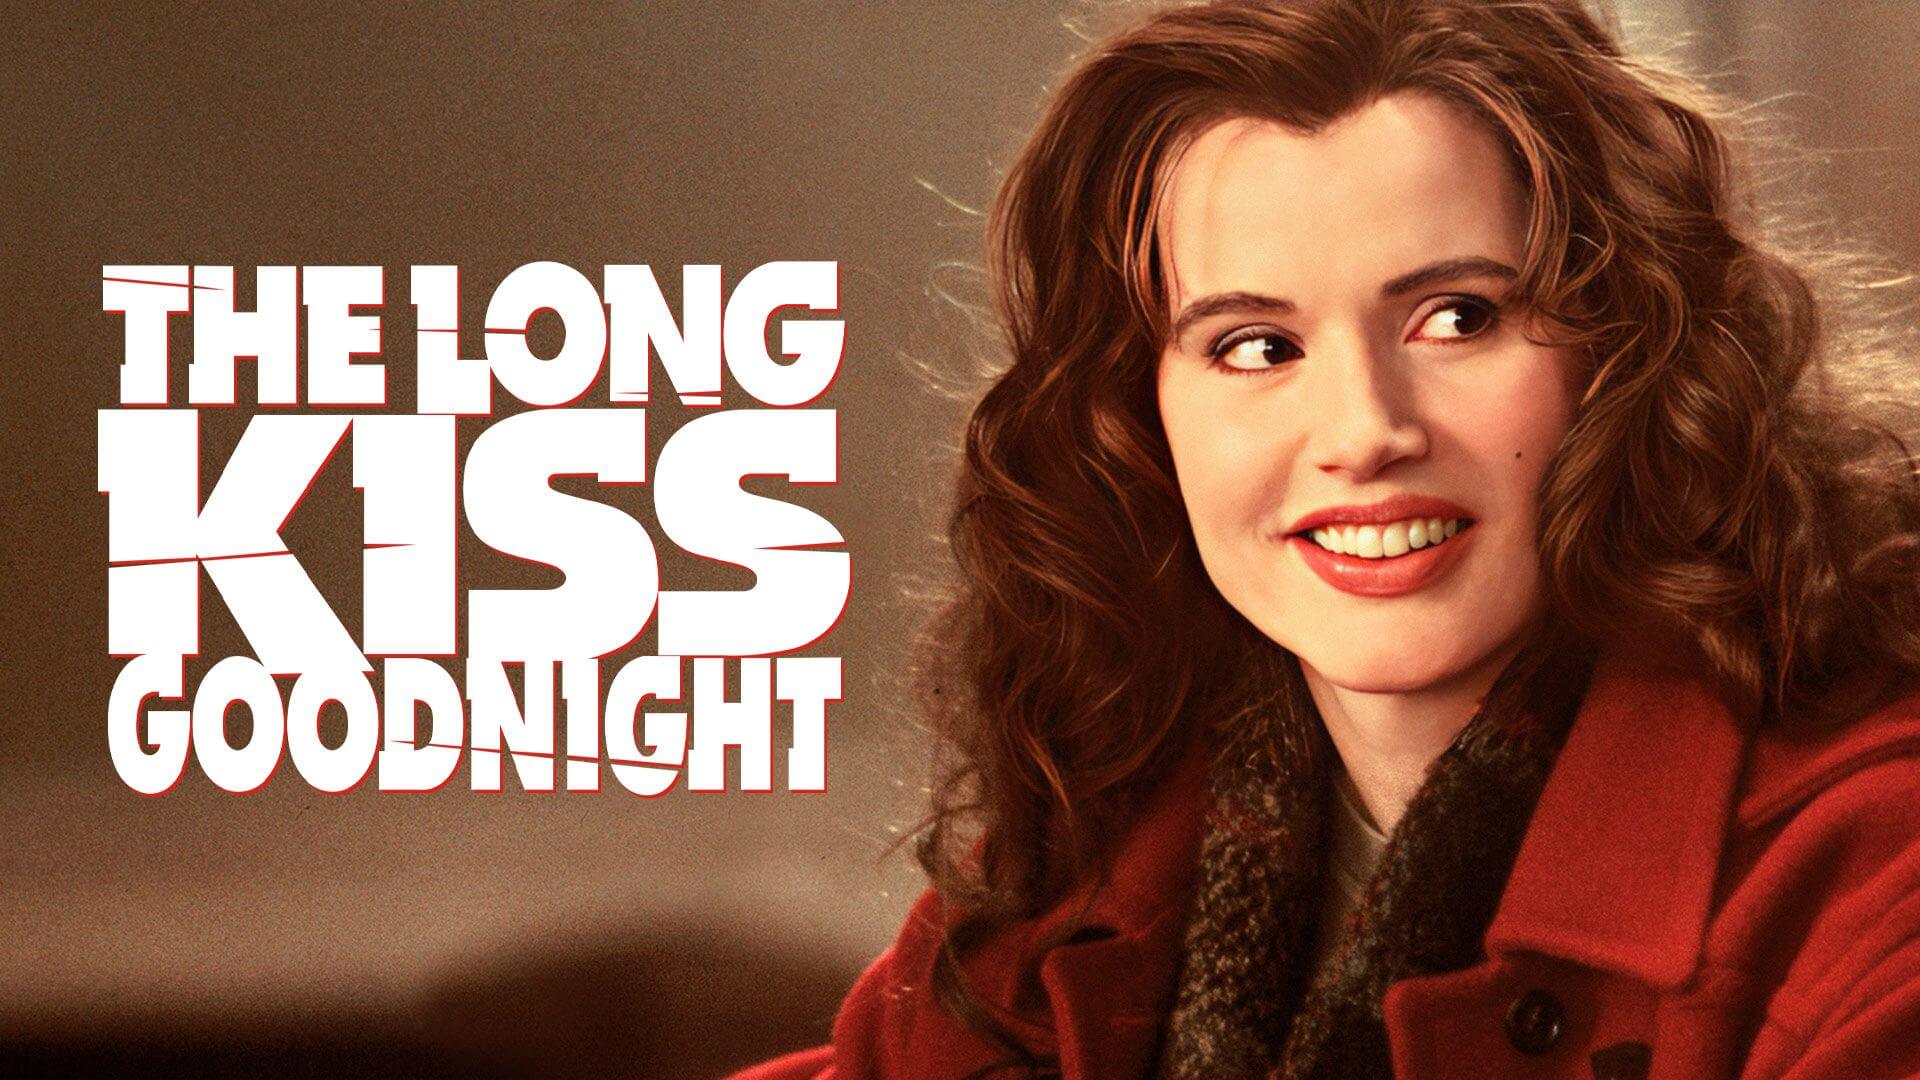 34 Facts about the movie The Long Kiss Goodnight - Facts.net